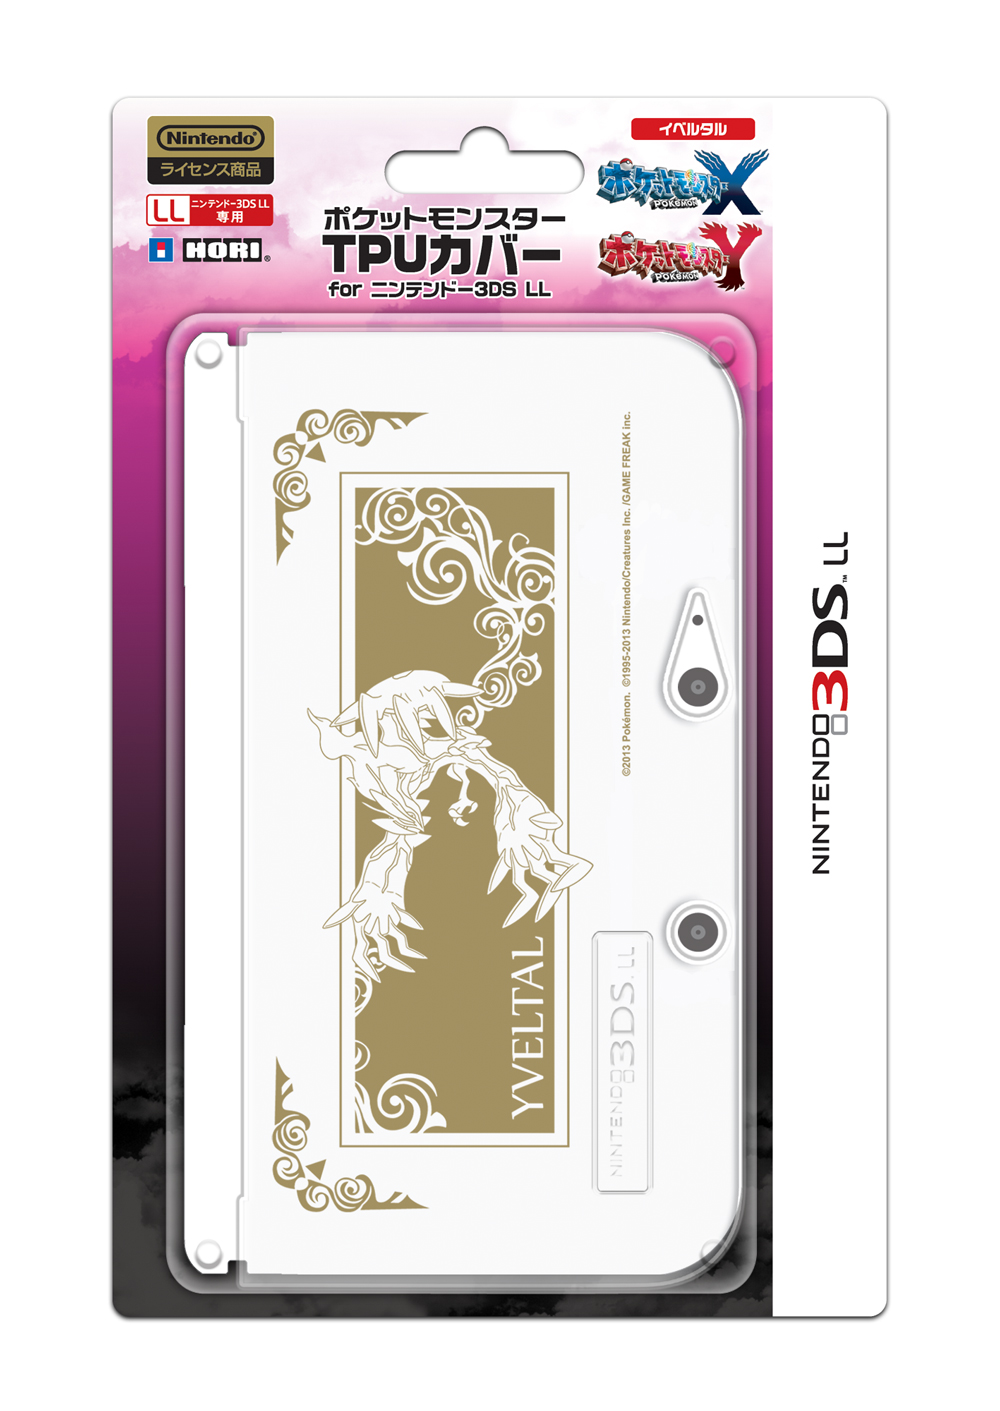 Offical Pokémon X and Y Cases by HORI - PocketMonsters.Net